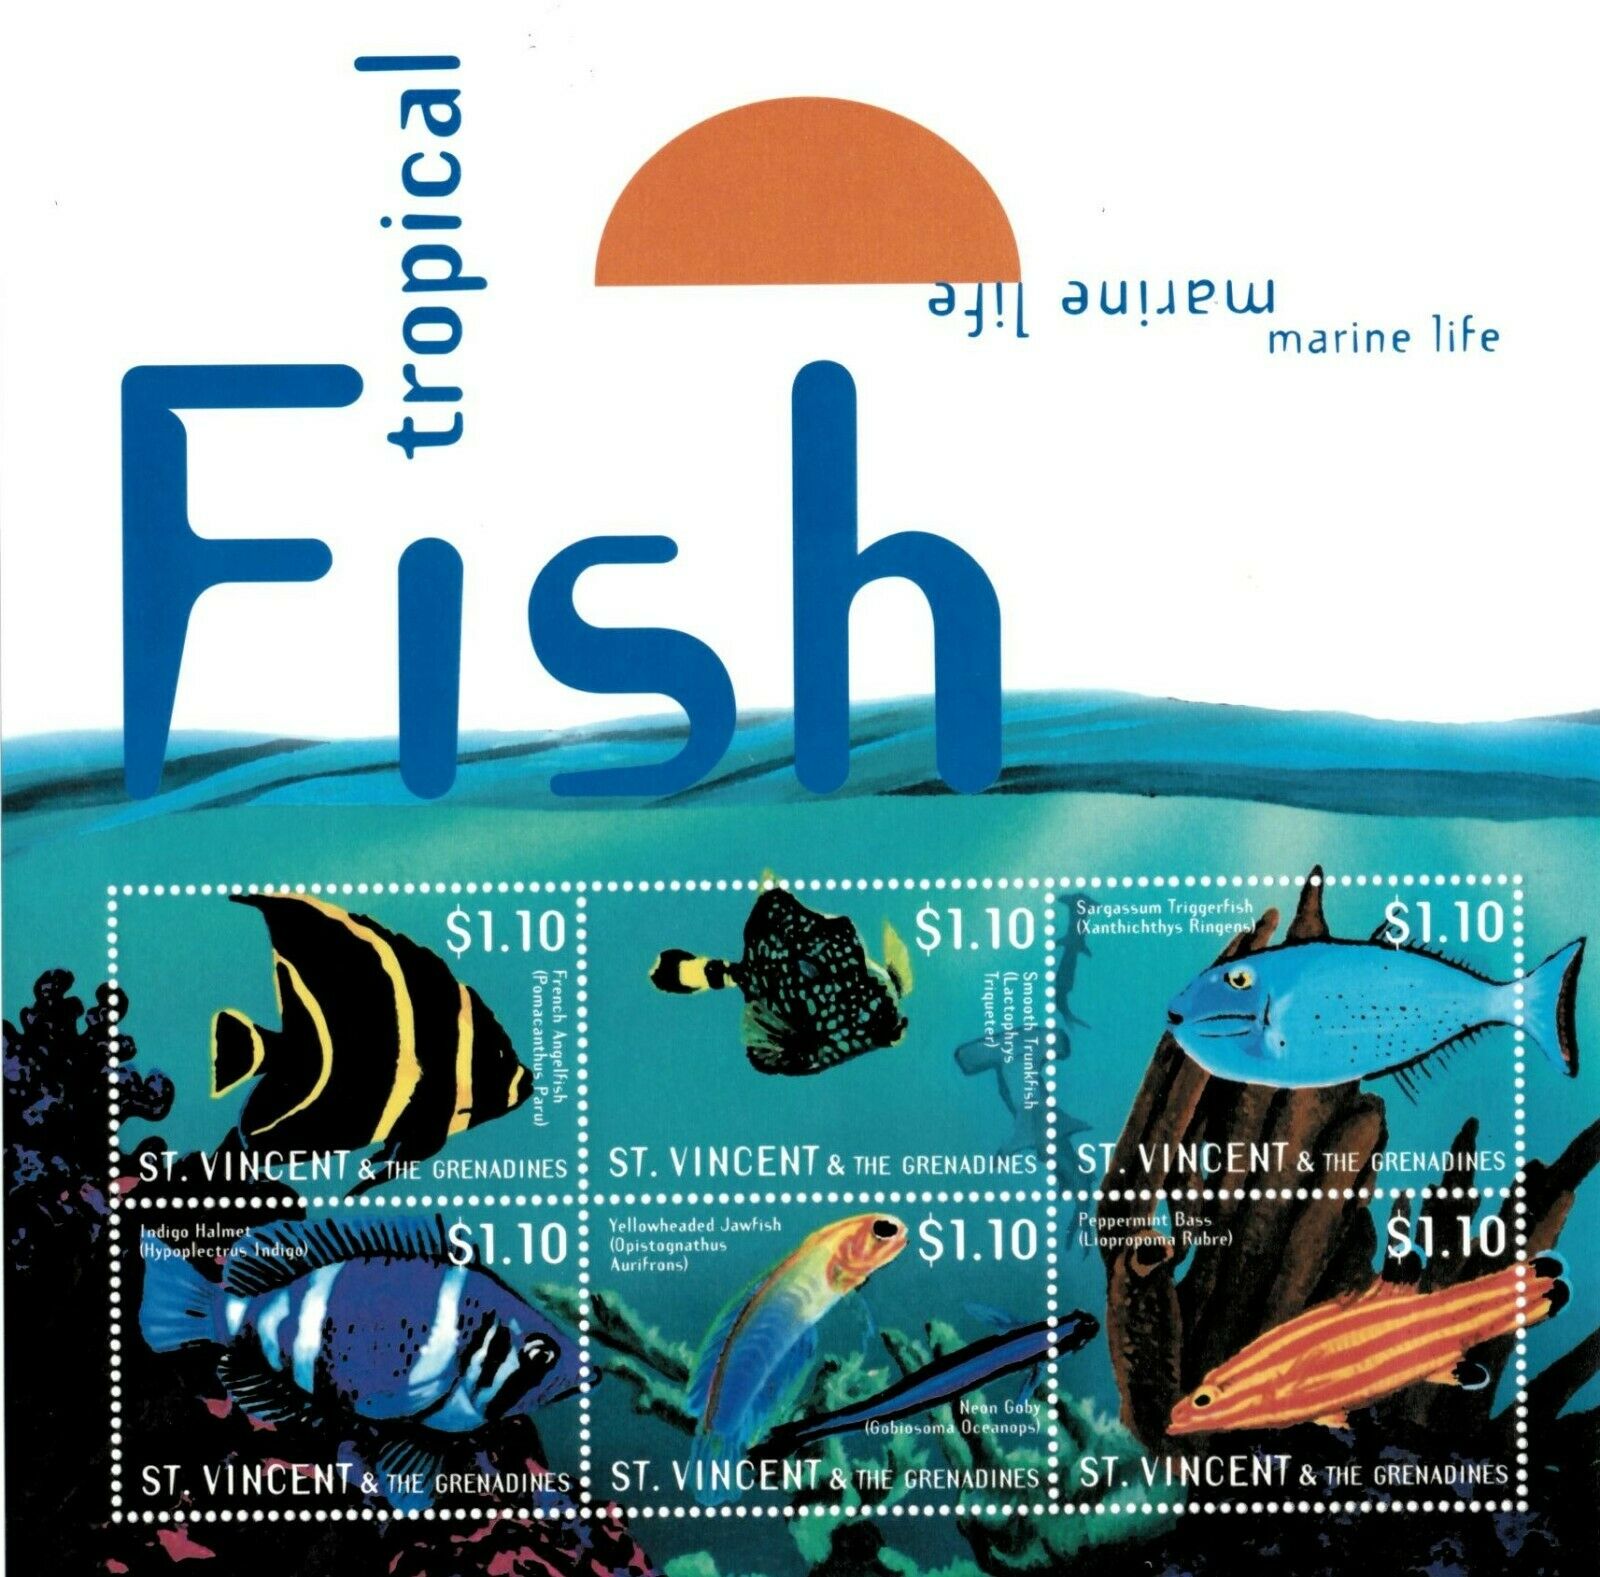 St. Vincent 2000 - Sc# 2760 Tropical Fish, Marine Life - Sheet Of 6 Stamps - Mnh